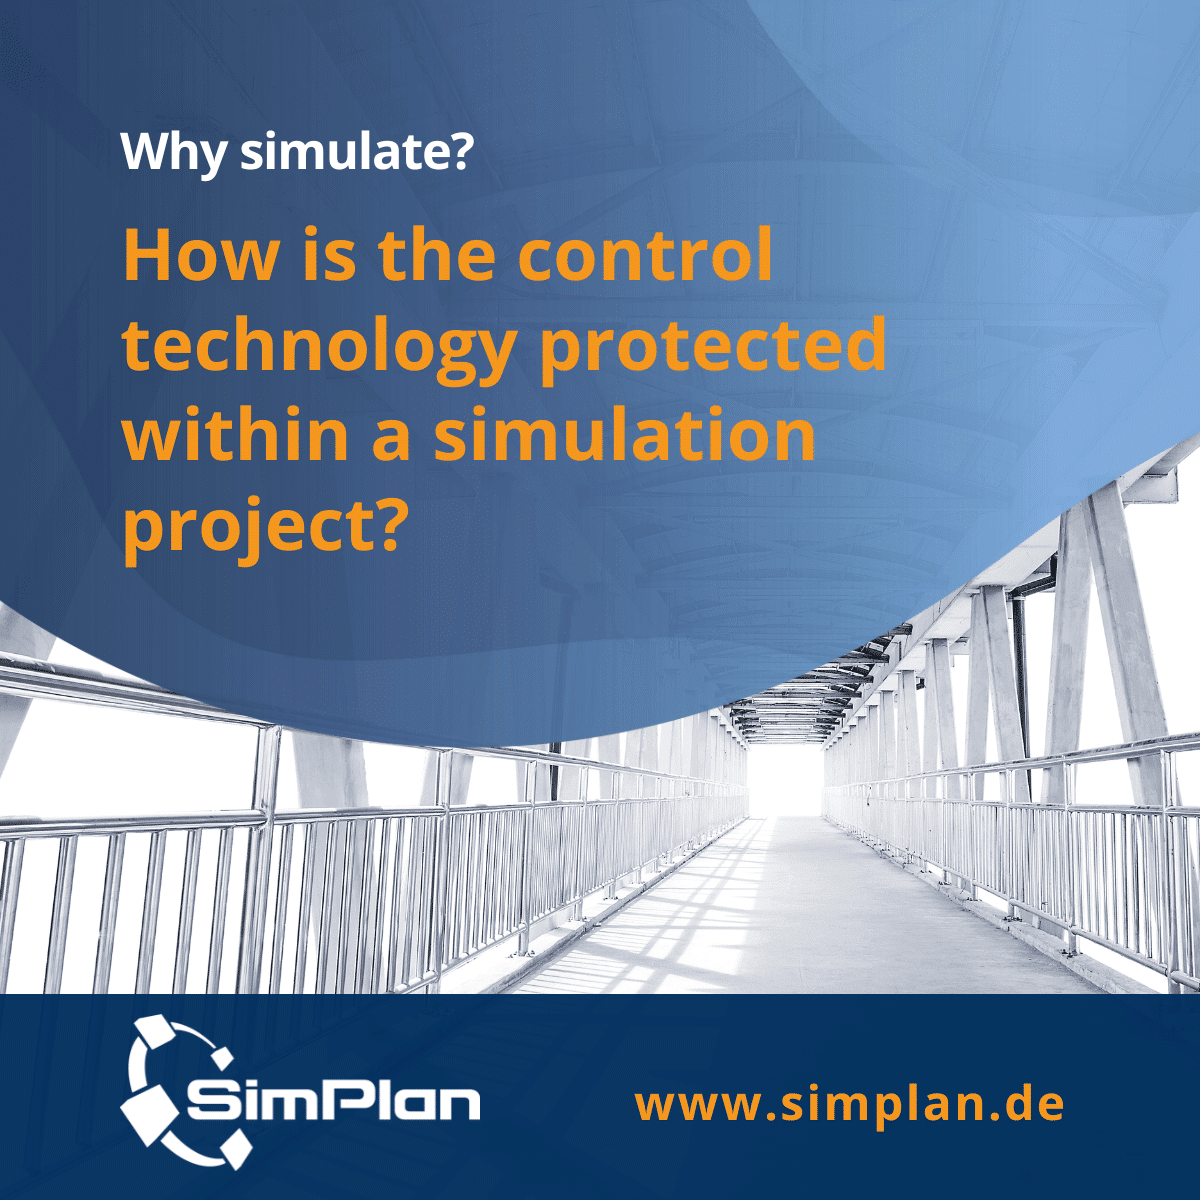 How is the control technology protected within a simulation project?